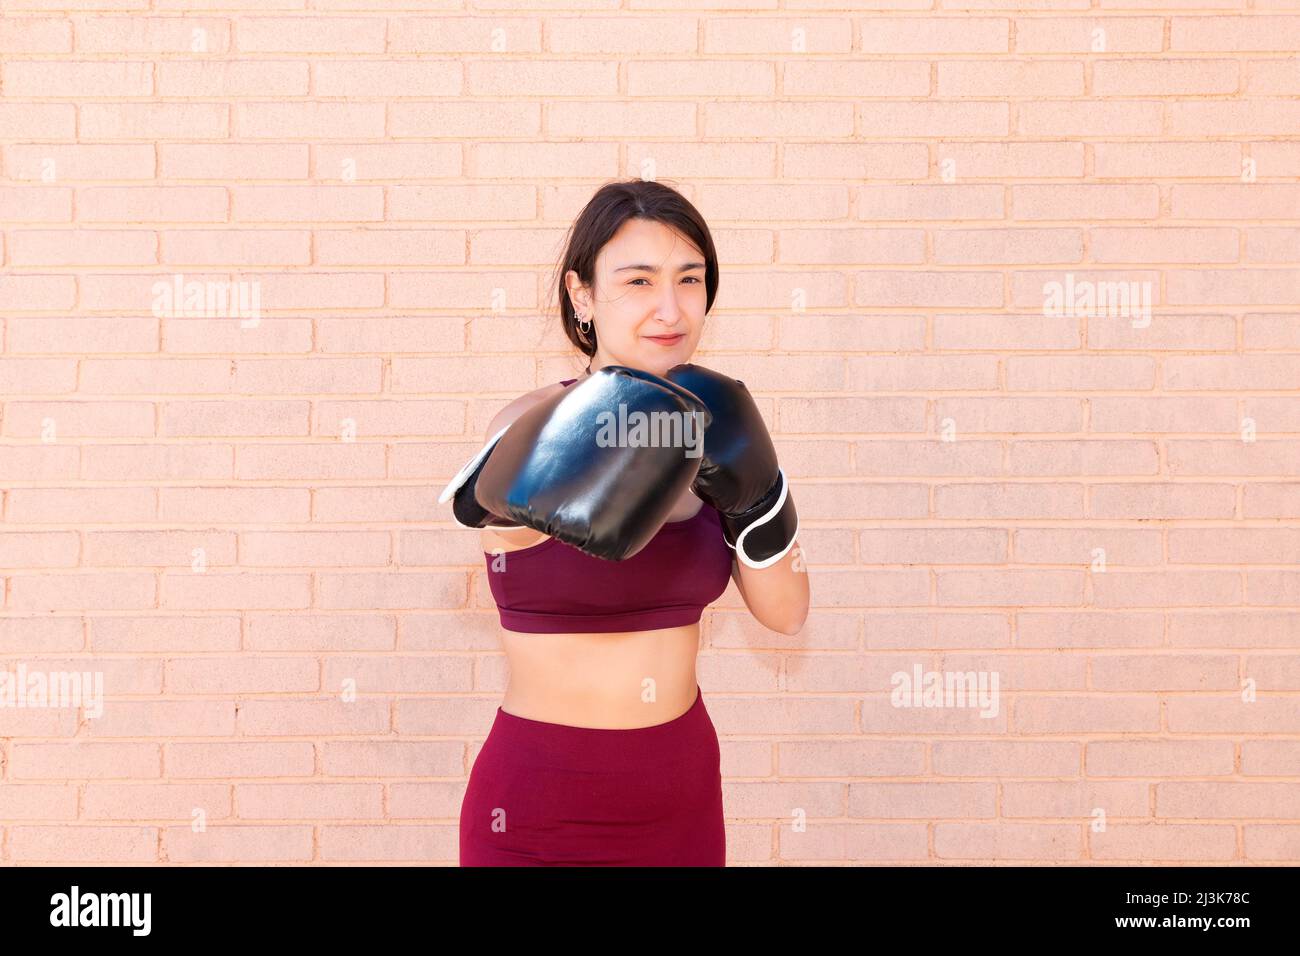 A young Caucasian woman wearing black boxing gloves is punching in front. The girl's face is in focus. In the background is a brick wall. Stock Photo